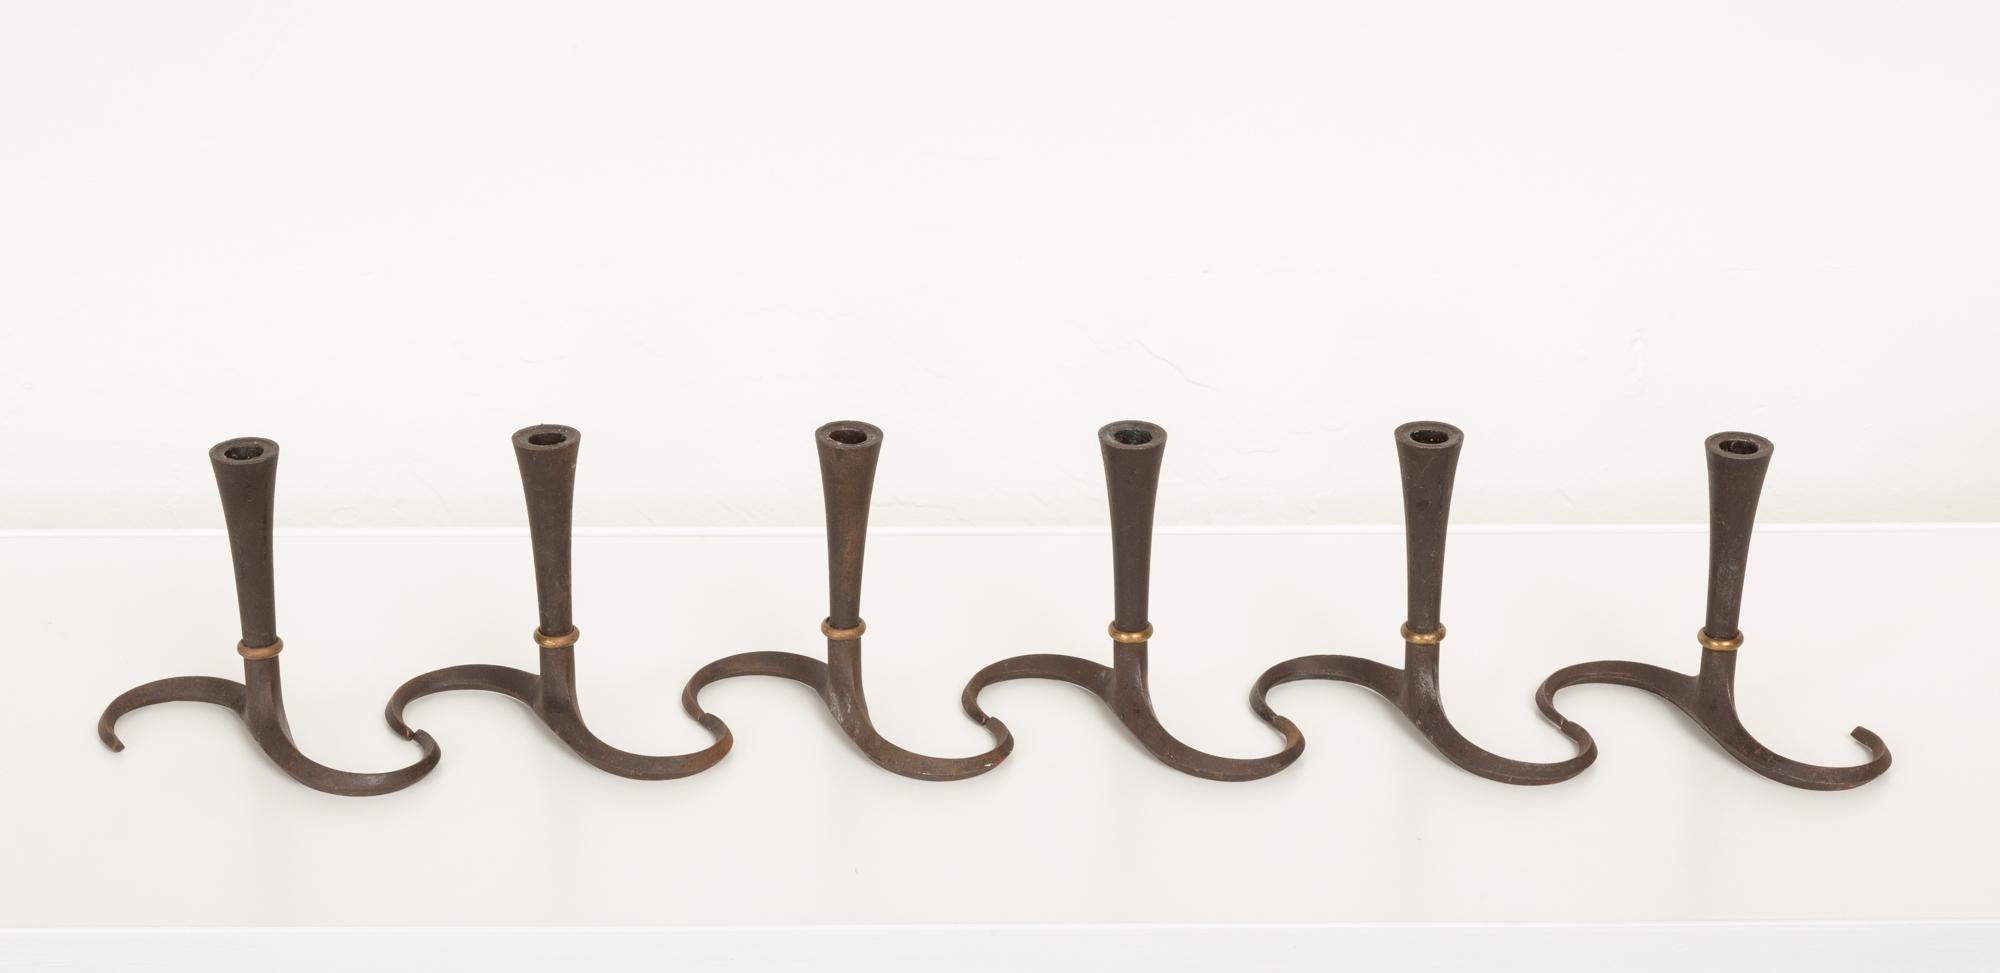 A set of six “S” candlesticks by Jens Quistgaard for Dansk. This rare example was produced in Denmark in the 1960s. They feature a cast iron body and curved base, with a patinated brass ring around the stem. Impressed [J.H.Q. Denmark] on